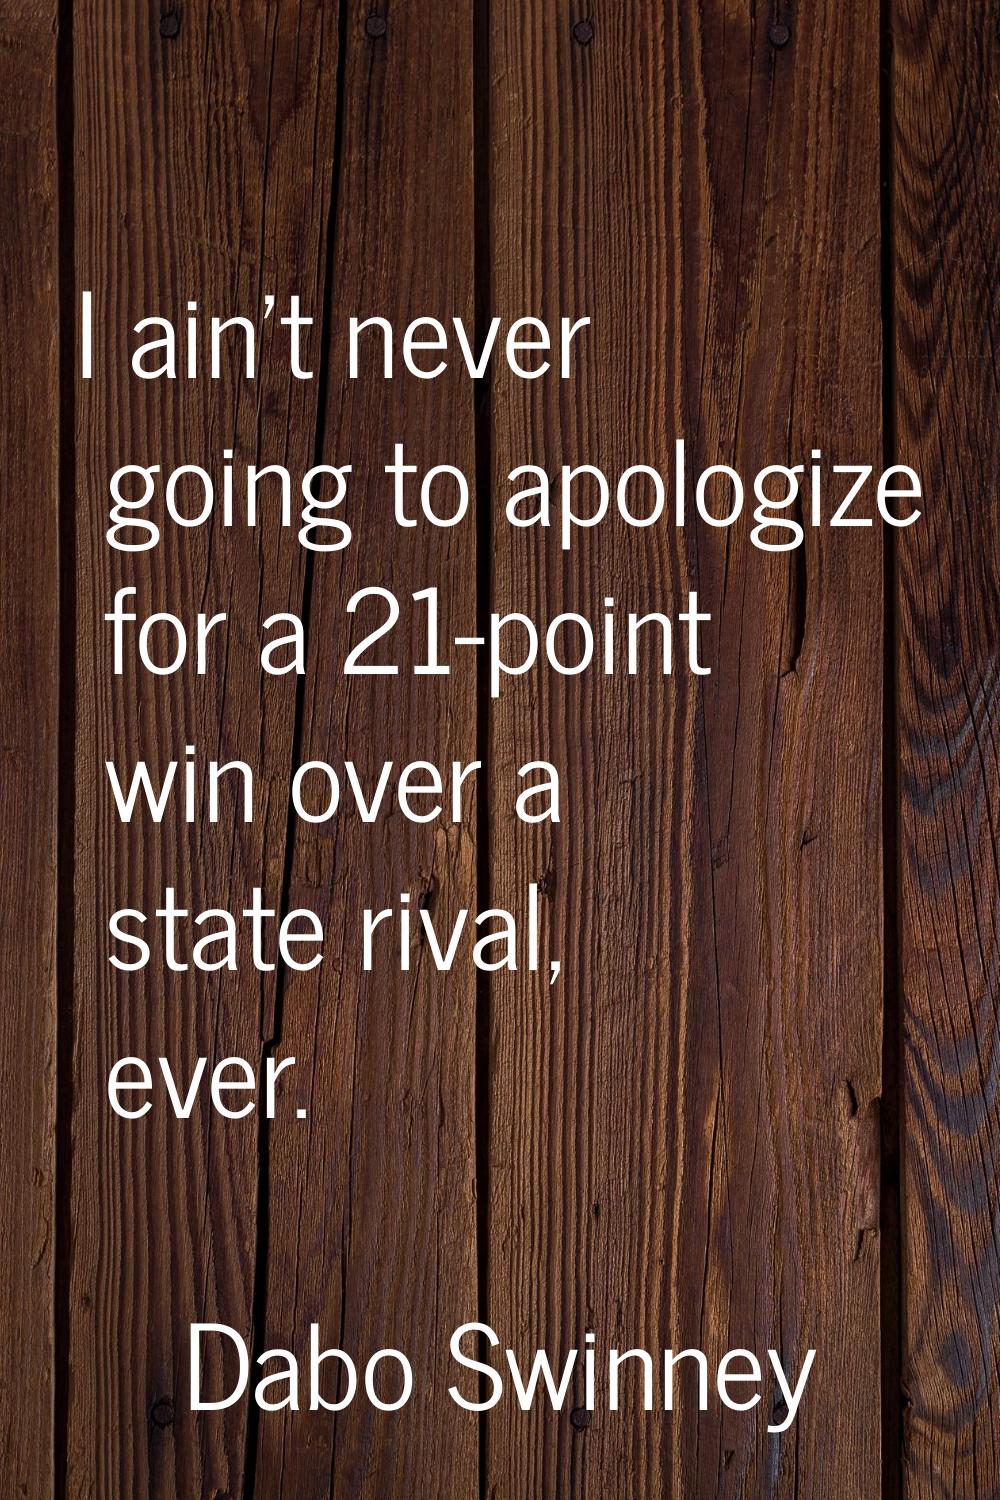 I ain't never going to apologize for a 21-point win over a state rival, ever.